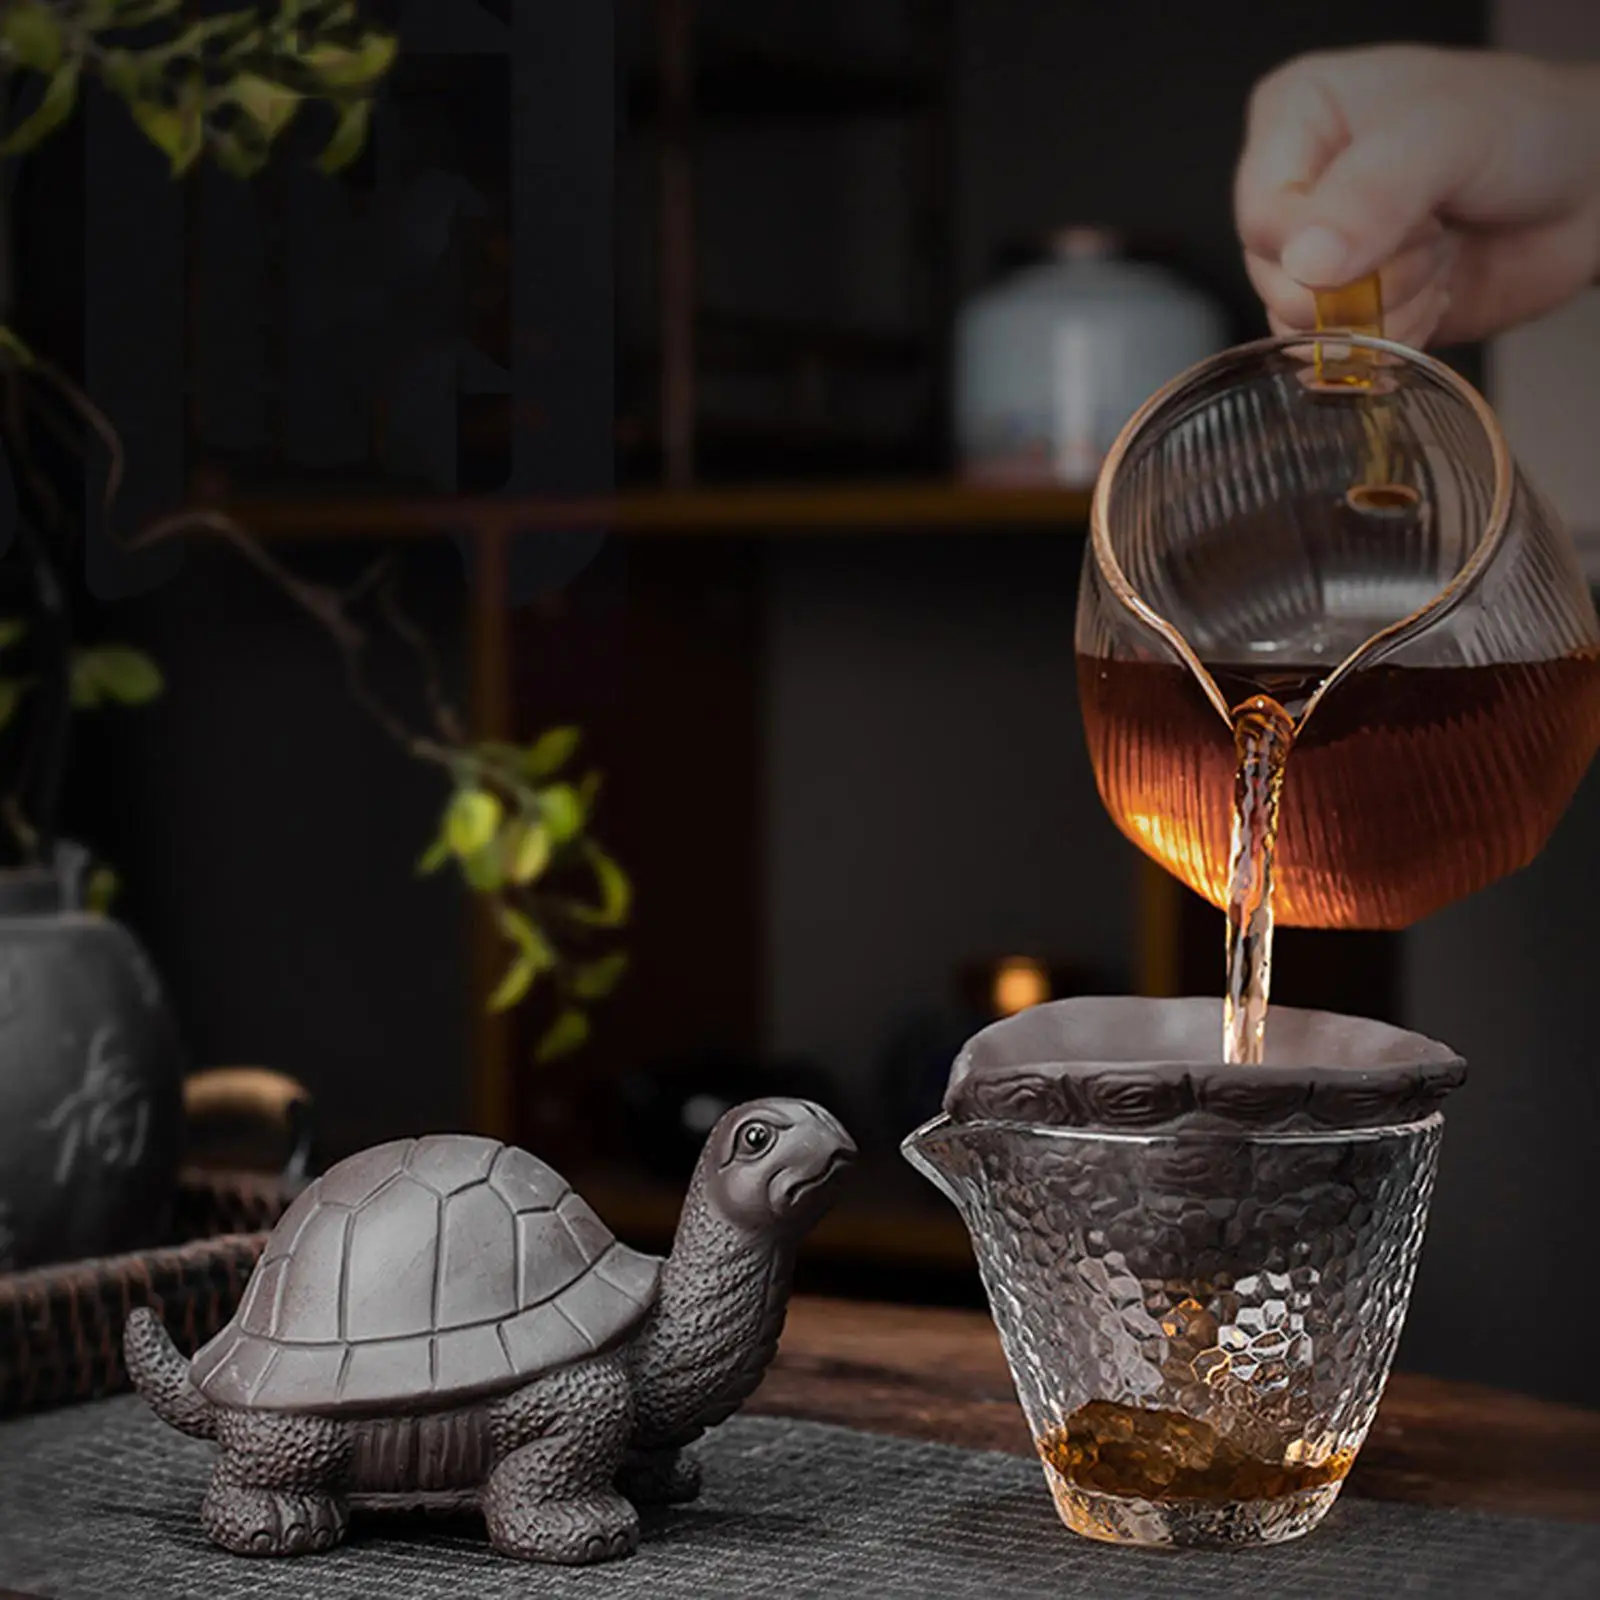 Chinese turtle Ornament Tea Strainer Well Crafted Decorative Crafts Statue for Tabletop Desktop Dining Room